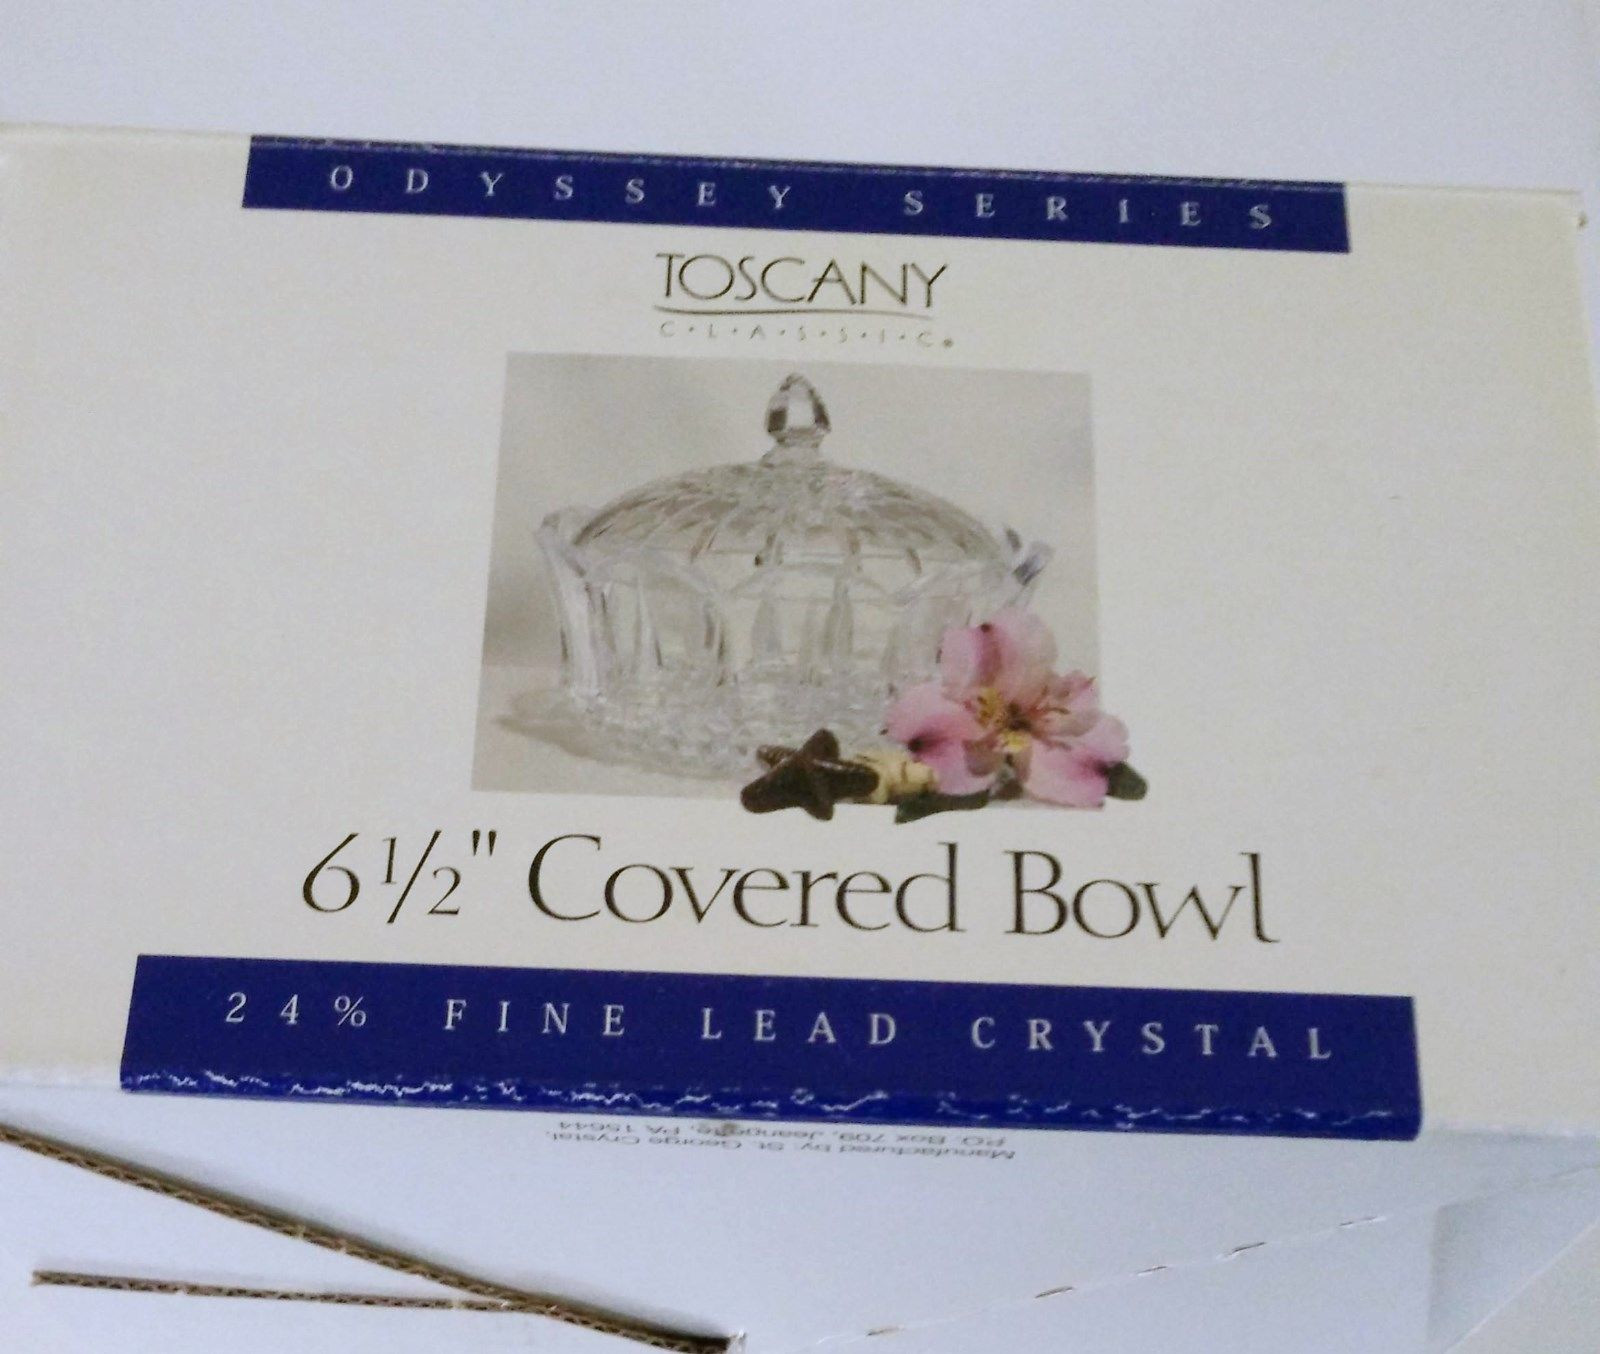 16 Lovely Cristal D Arques Lead Crystal Vase 2024 free download cristal d arques lead crystal vase of toscany classic odyssey series 6 1 2 covered bowl 24 fine lead intended for 1 of 11only 1 available